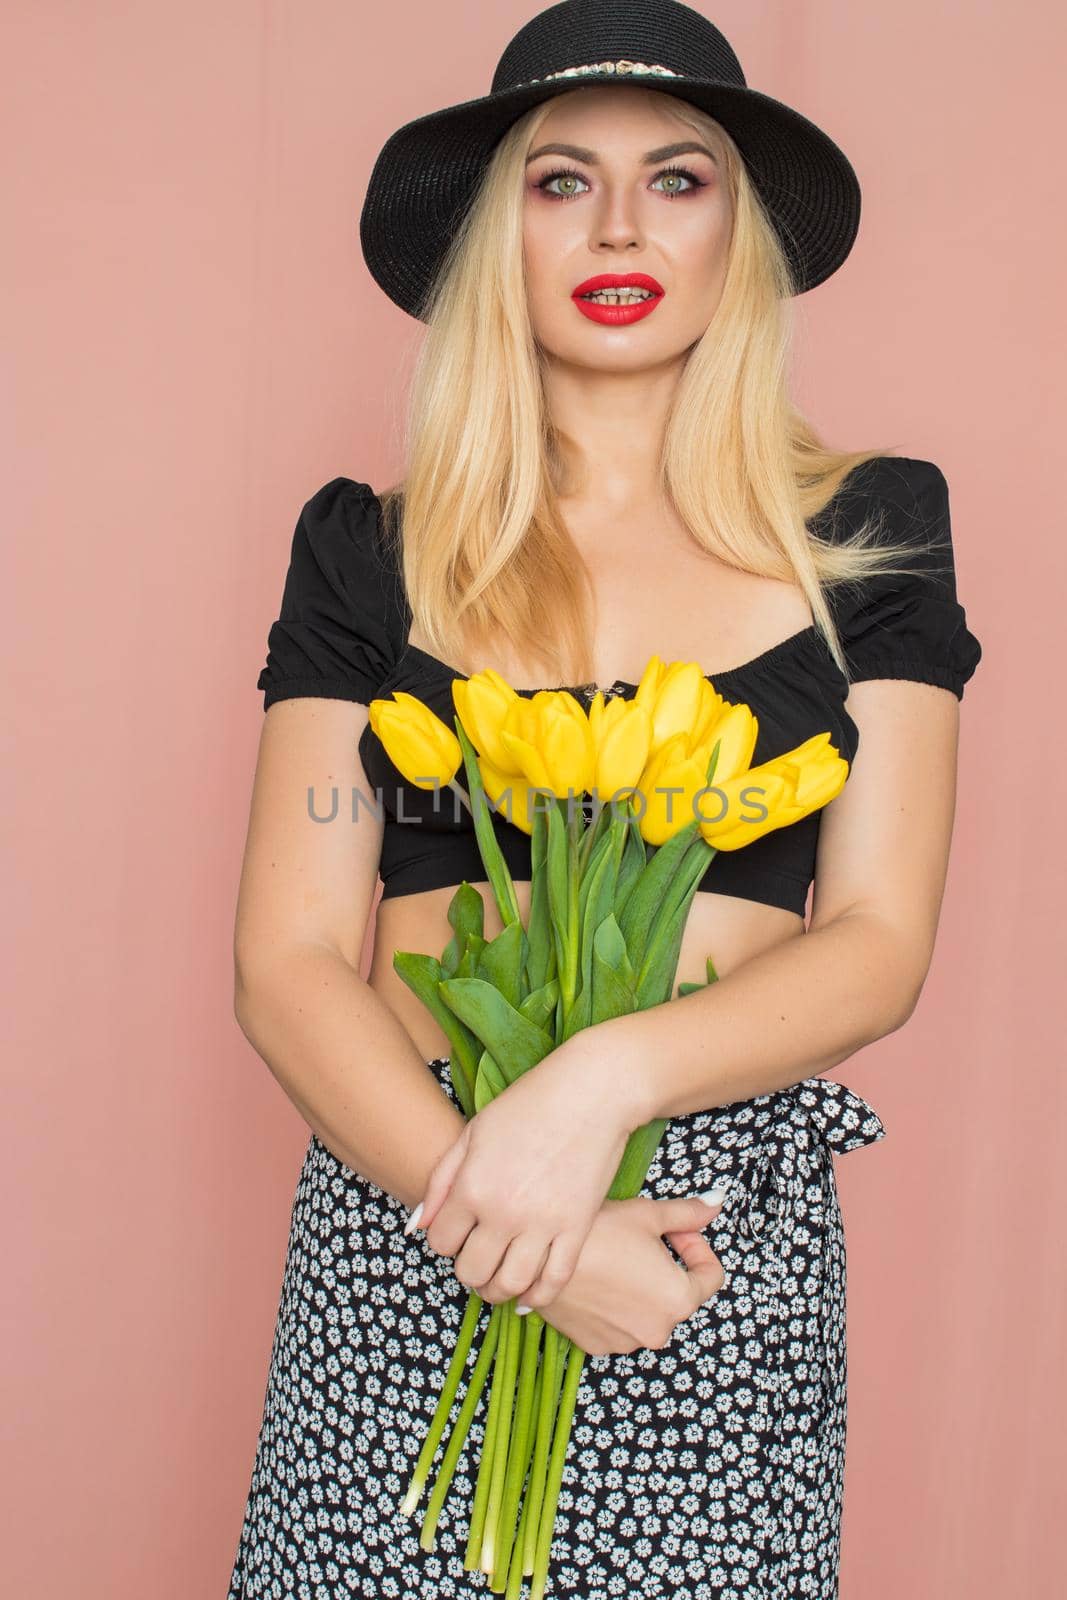 Summer fashion portrait blonde woman. Sexy look in black top and skirt, wearing hat. Red lips. Holding yellow tulips in her hands